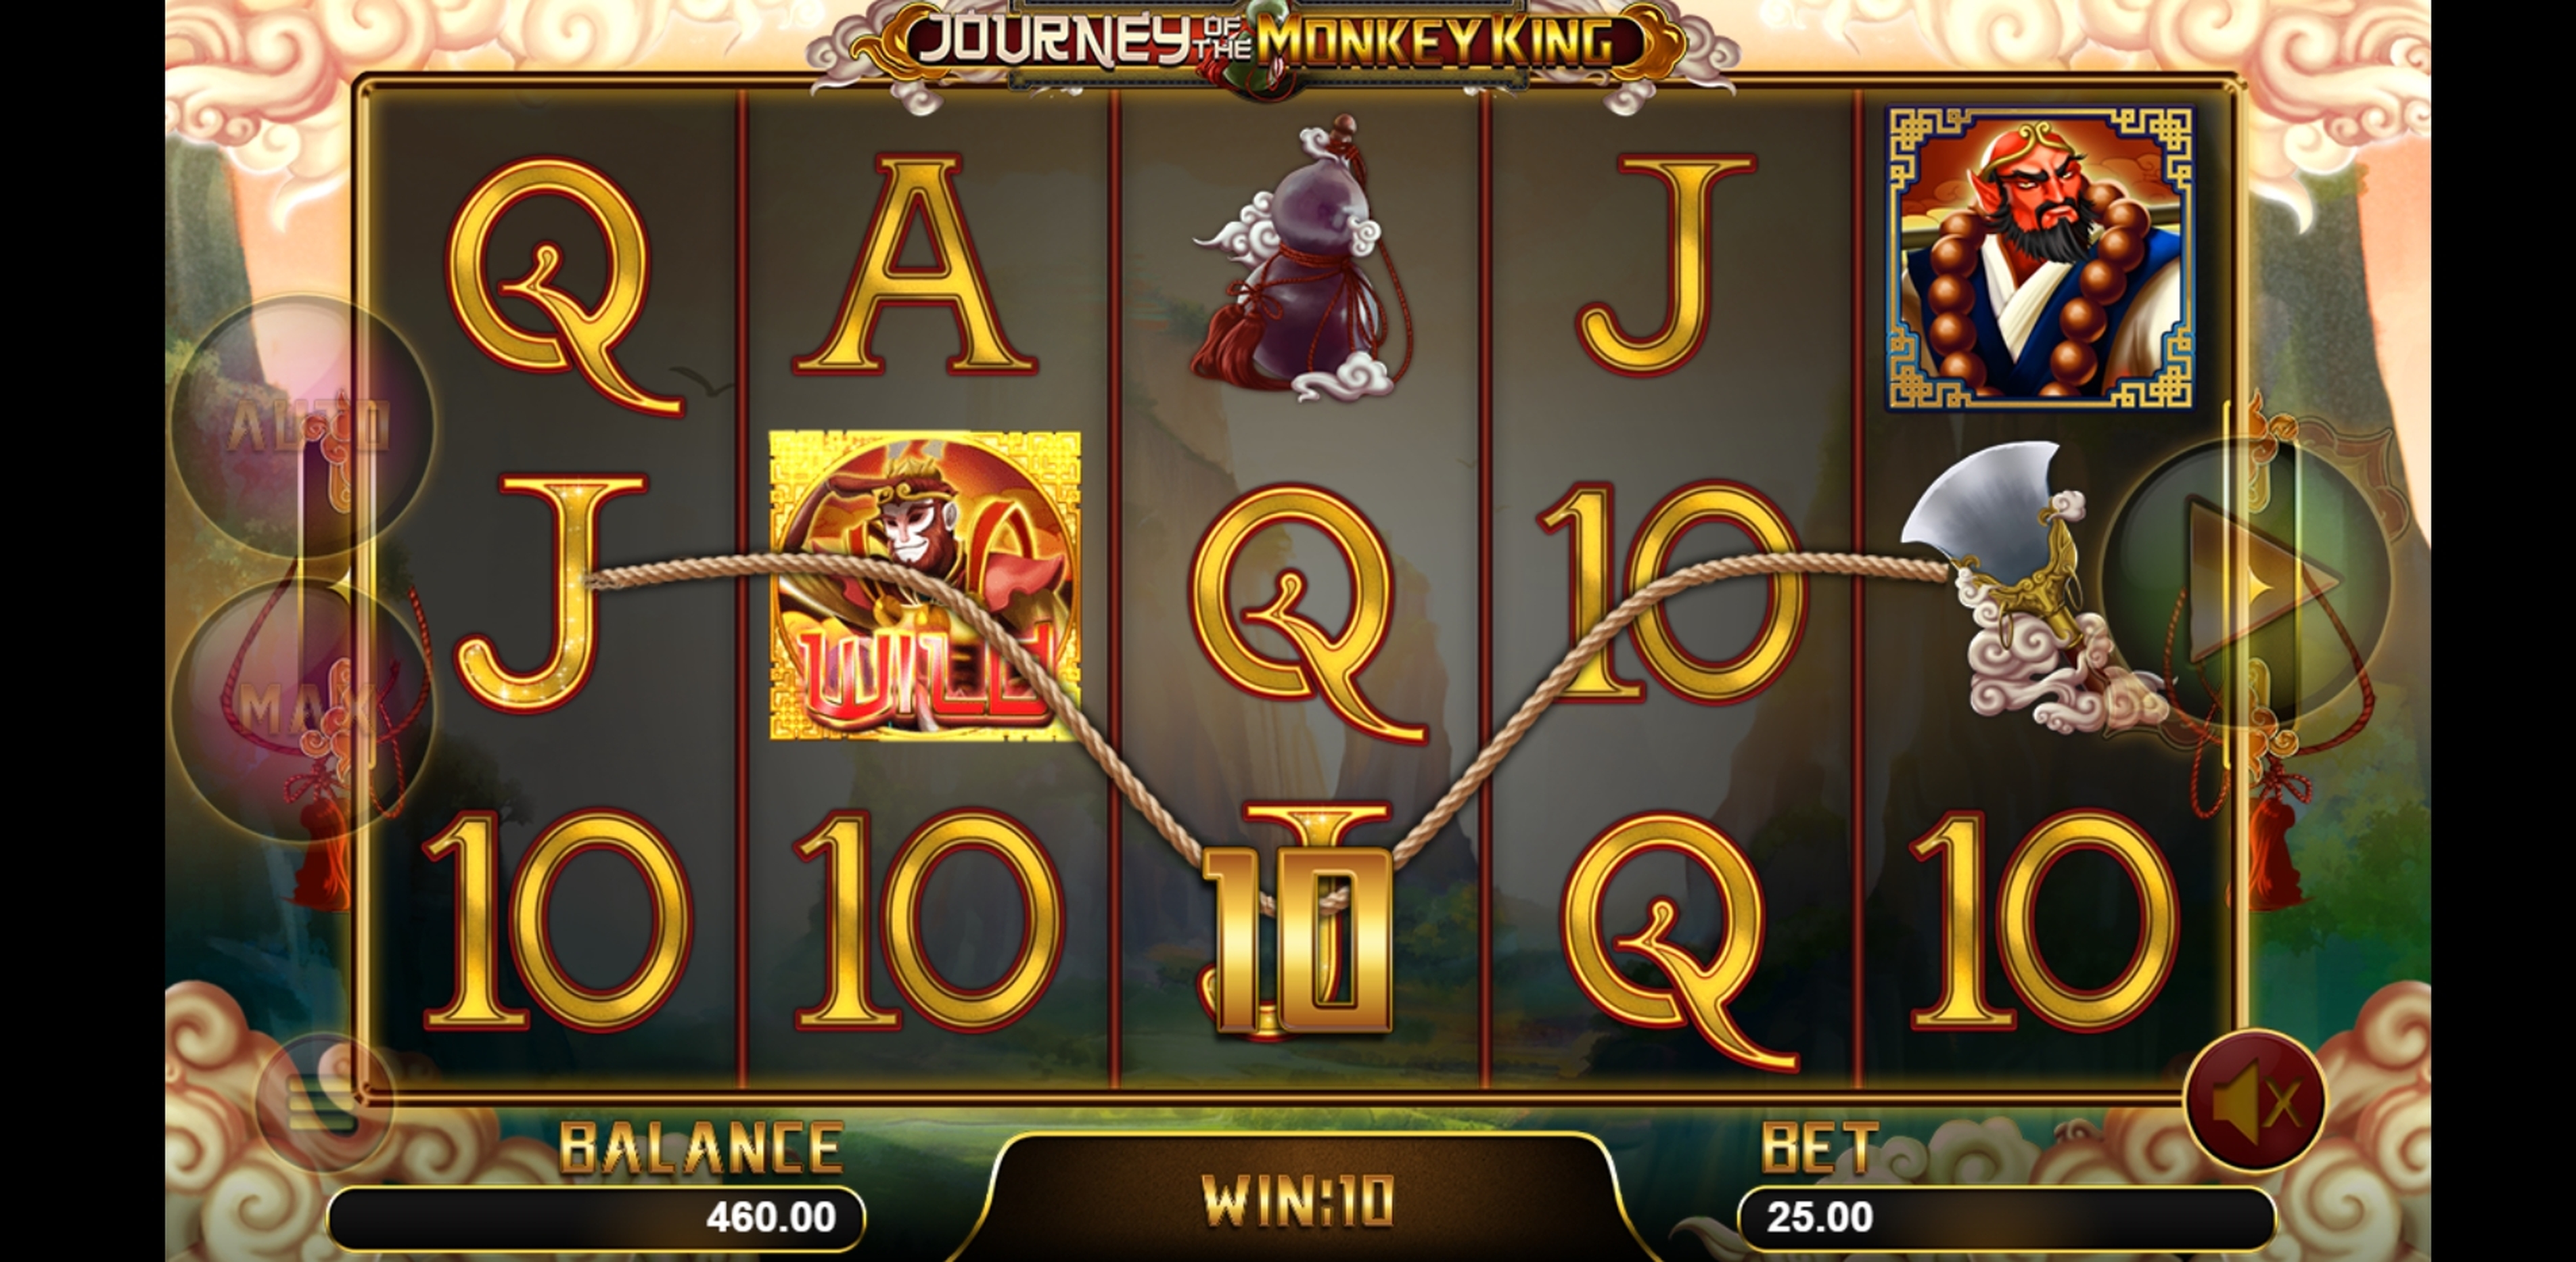 Win Money in Journey Of The Monkey King Free Slot Game by Magma